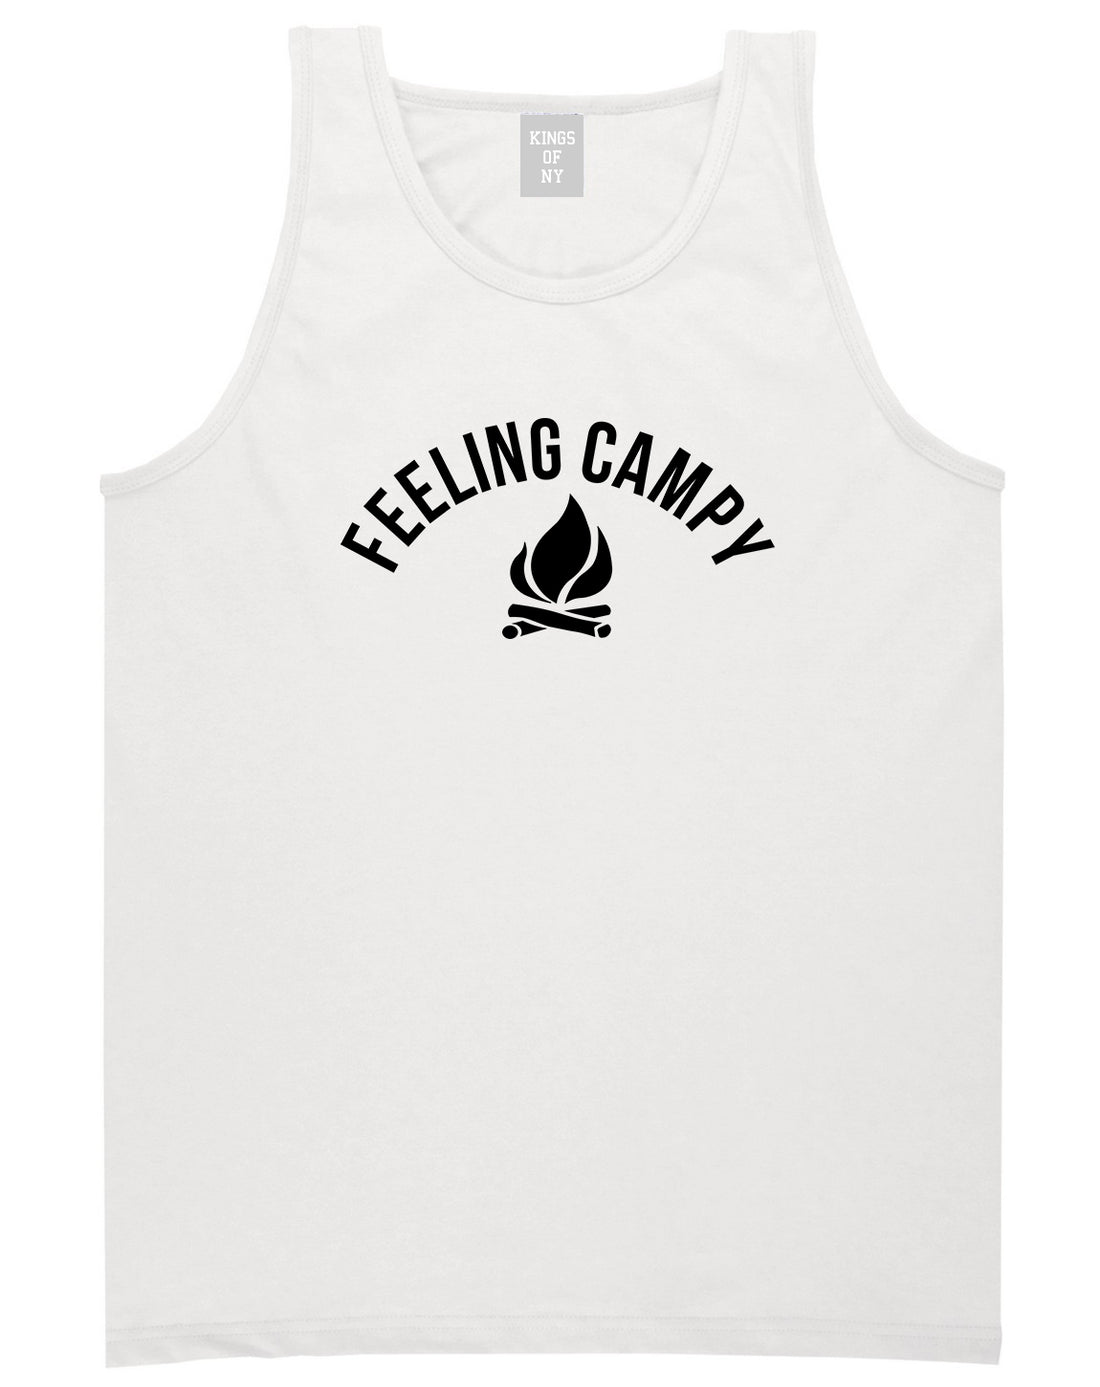 Feeling Campy Camp Fire Outdoor Mens Tank Top Shirt White